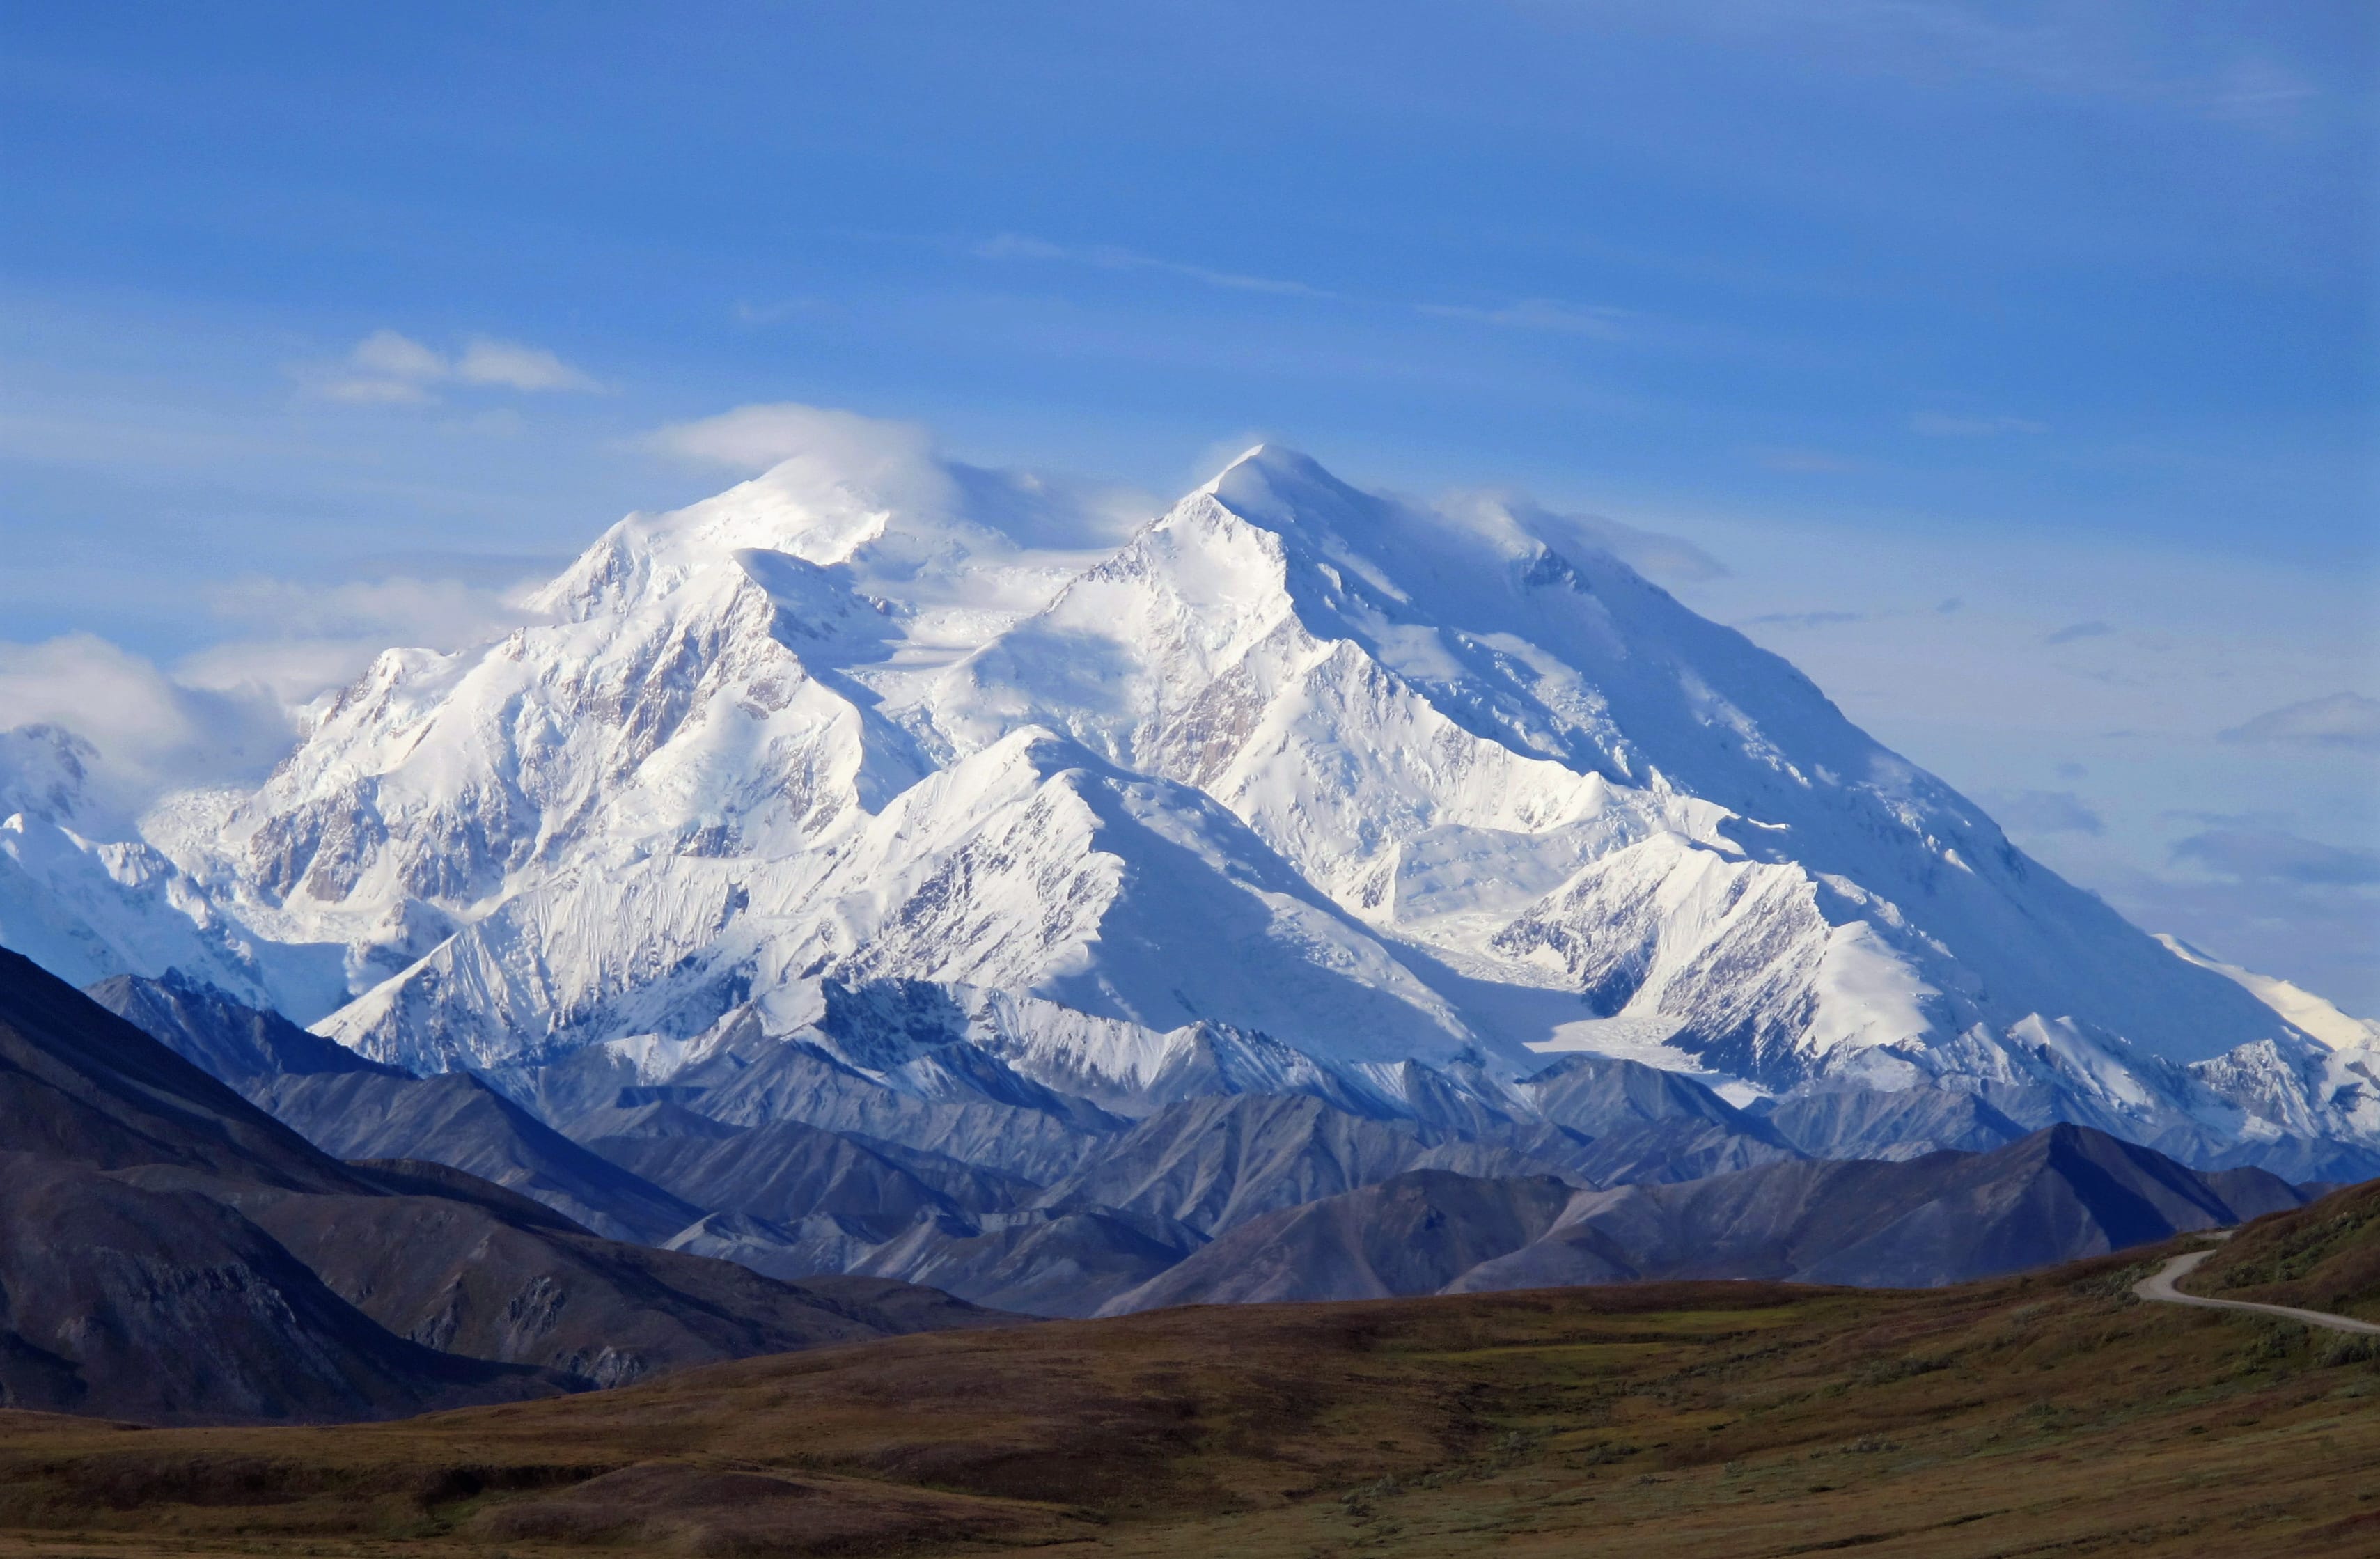 FILE - This Aug. 19, 2011 file photo shows Mount McKinley in Denali National Park, Alaska. President Barack Obama on Sunday, Aug. 30, 2015 said he's changing the name of the tallest mountain in North America from Mount McKinley to Denali.